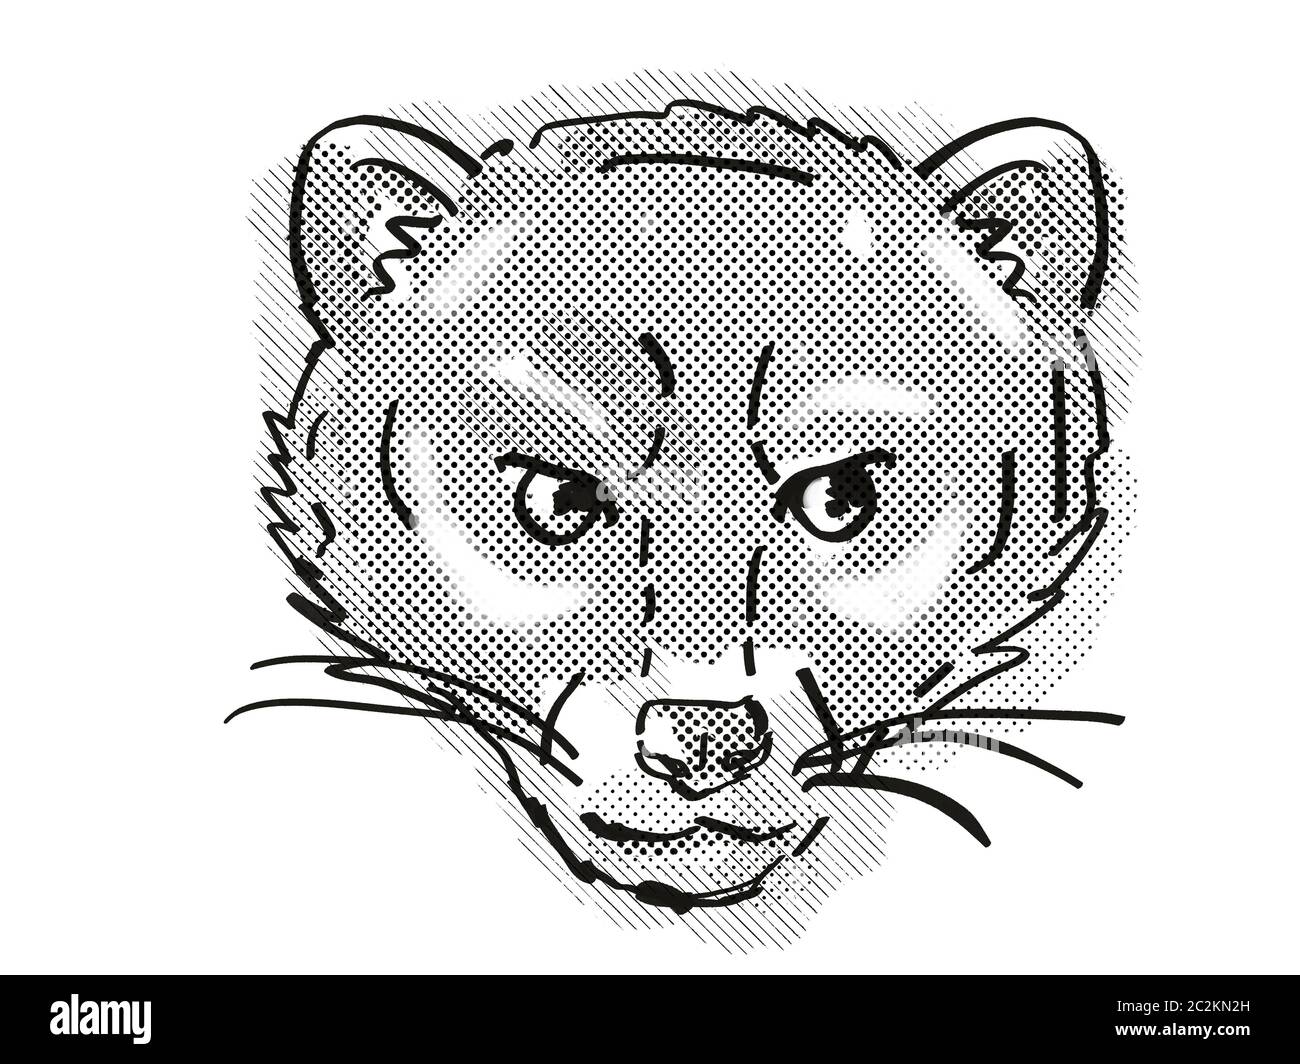 Retro cartoon style drawing of head of a Malayan Civet or Viverra Tangalunga , an endangered wildlife species on isolated white background done in bla Stock Photo